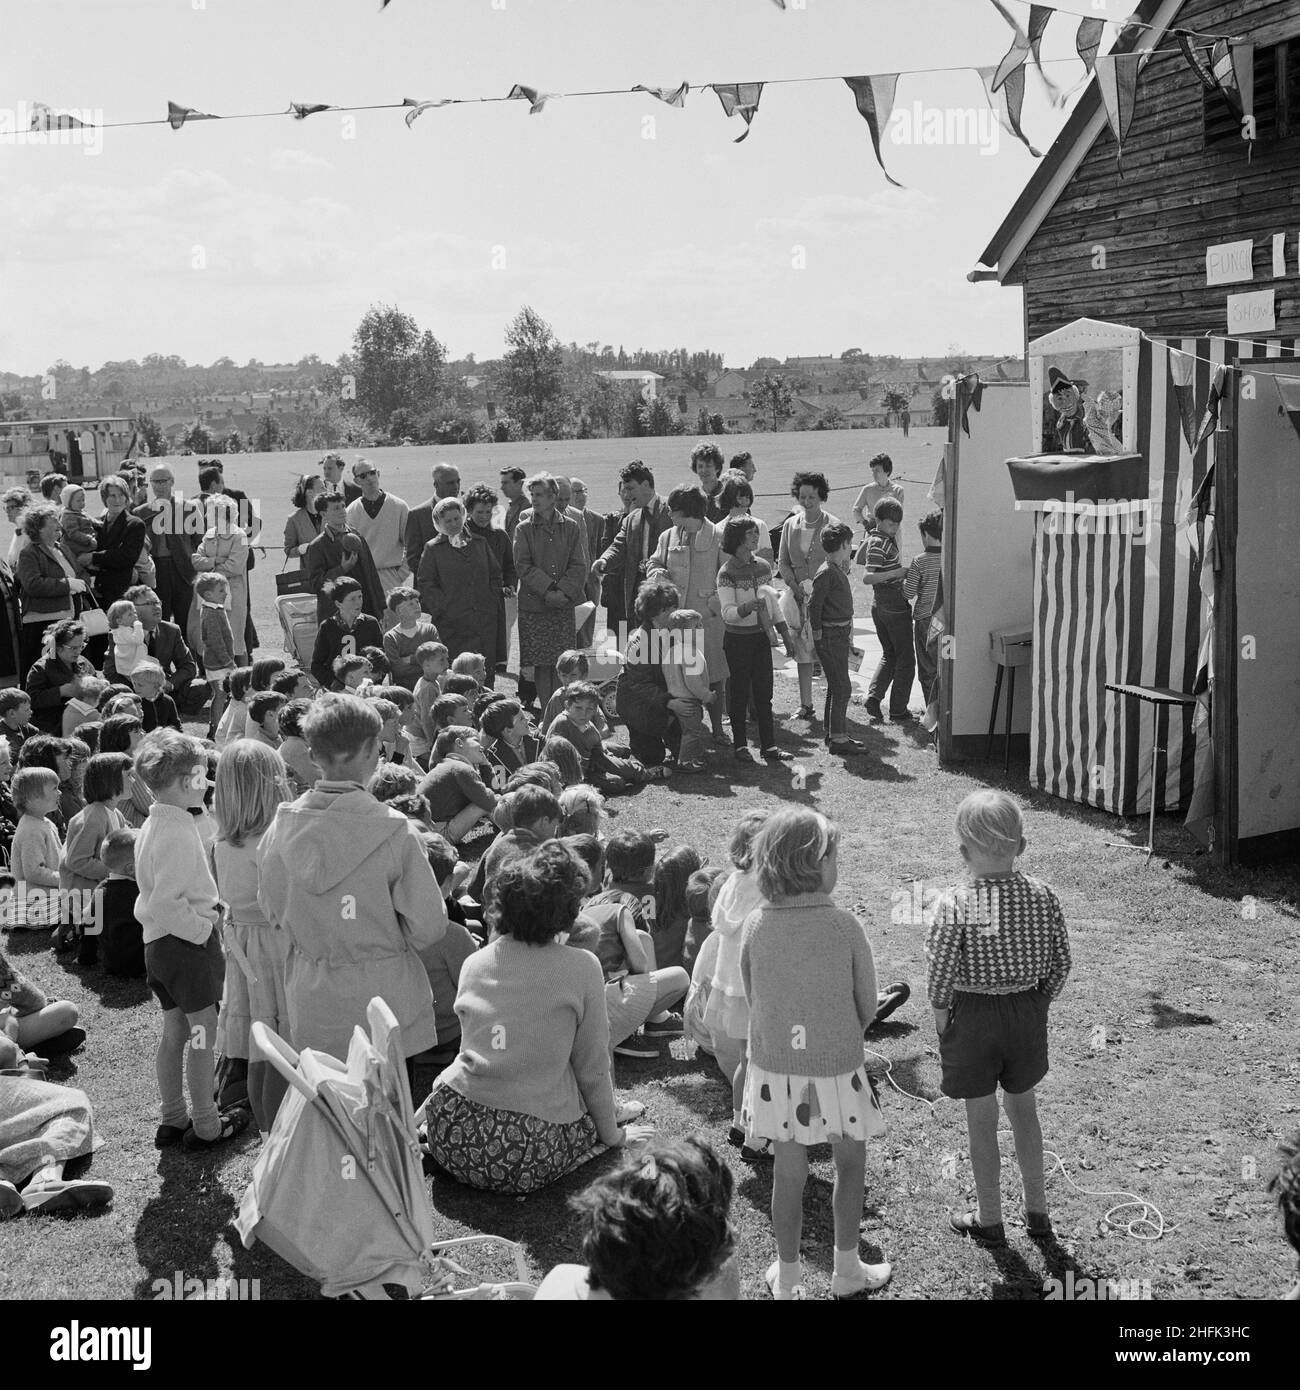 Laing Sports Ground, Rowley Lane, Elstree, Barnet, London, 26/06/1965. Children watching a Punch and Judy show at the annual Laing sports day held at the Laing Sports Ground at Elstree. In 1965 Laing's annual sports day was held at the sports ground on Rowley Lane on 26th June. As well as football and athletics, there were novelty events including the sack race and Donkey Derby, and events for children including go-kart races, fancy dress competitions, and pony rides. Stock Photo